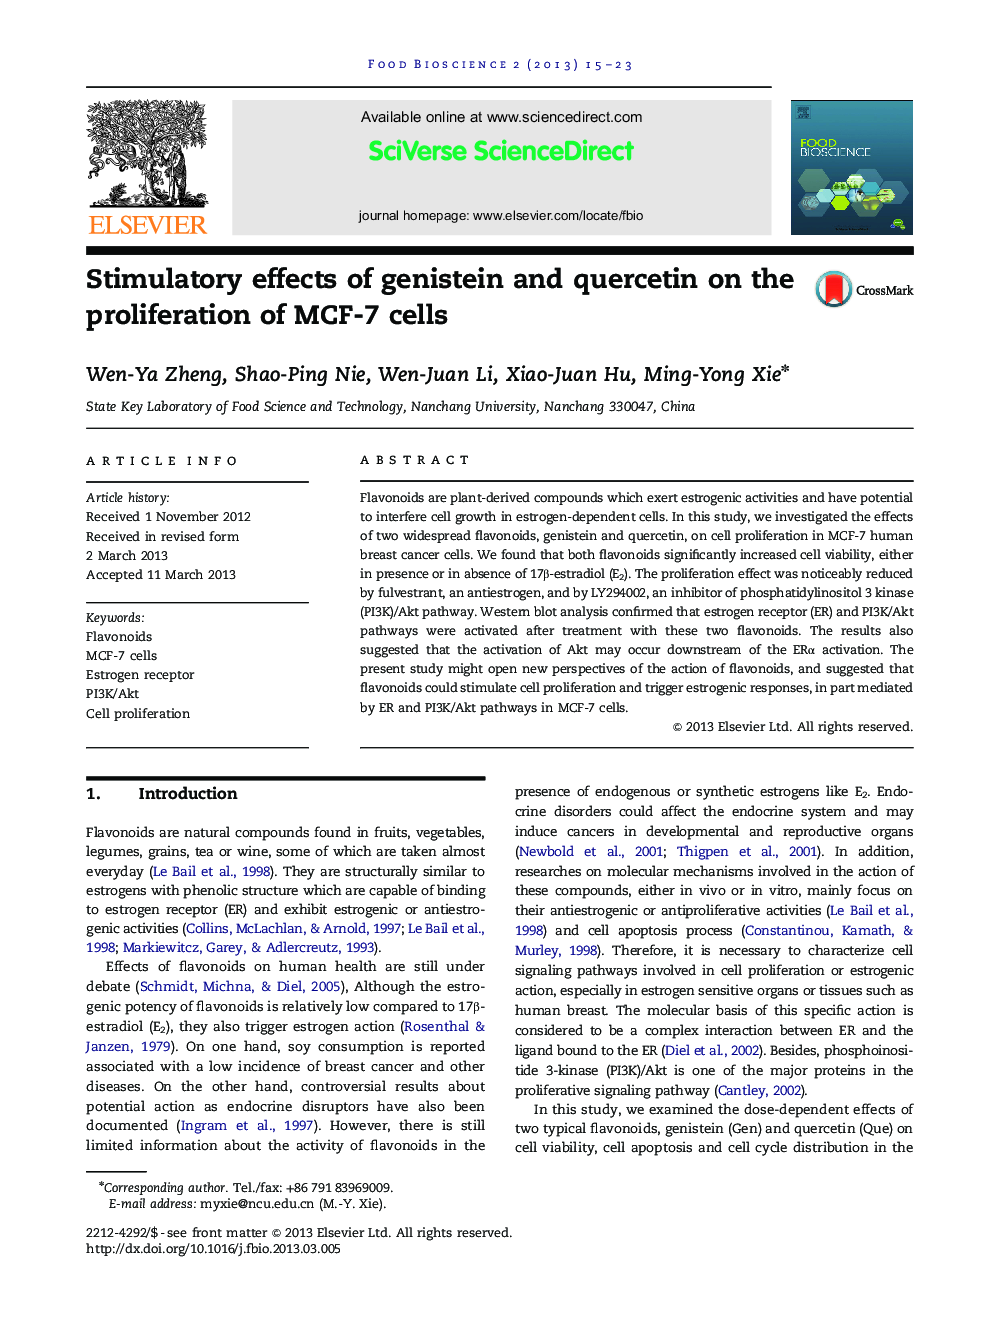 Stimulatory effects of genistein and quercetin on the proliferation of MCF-7 cells